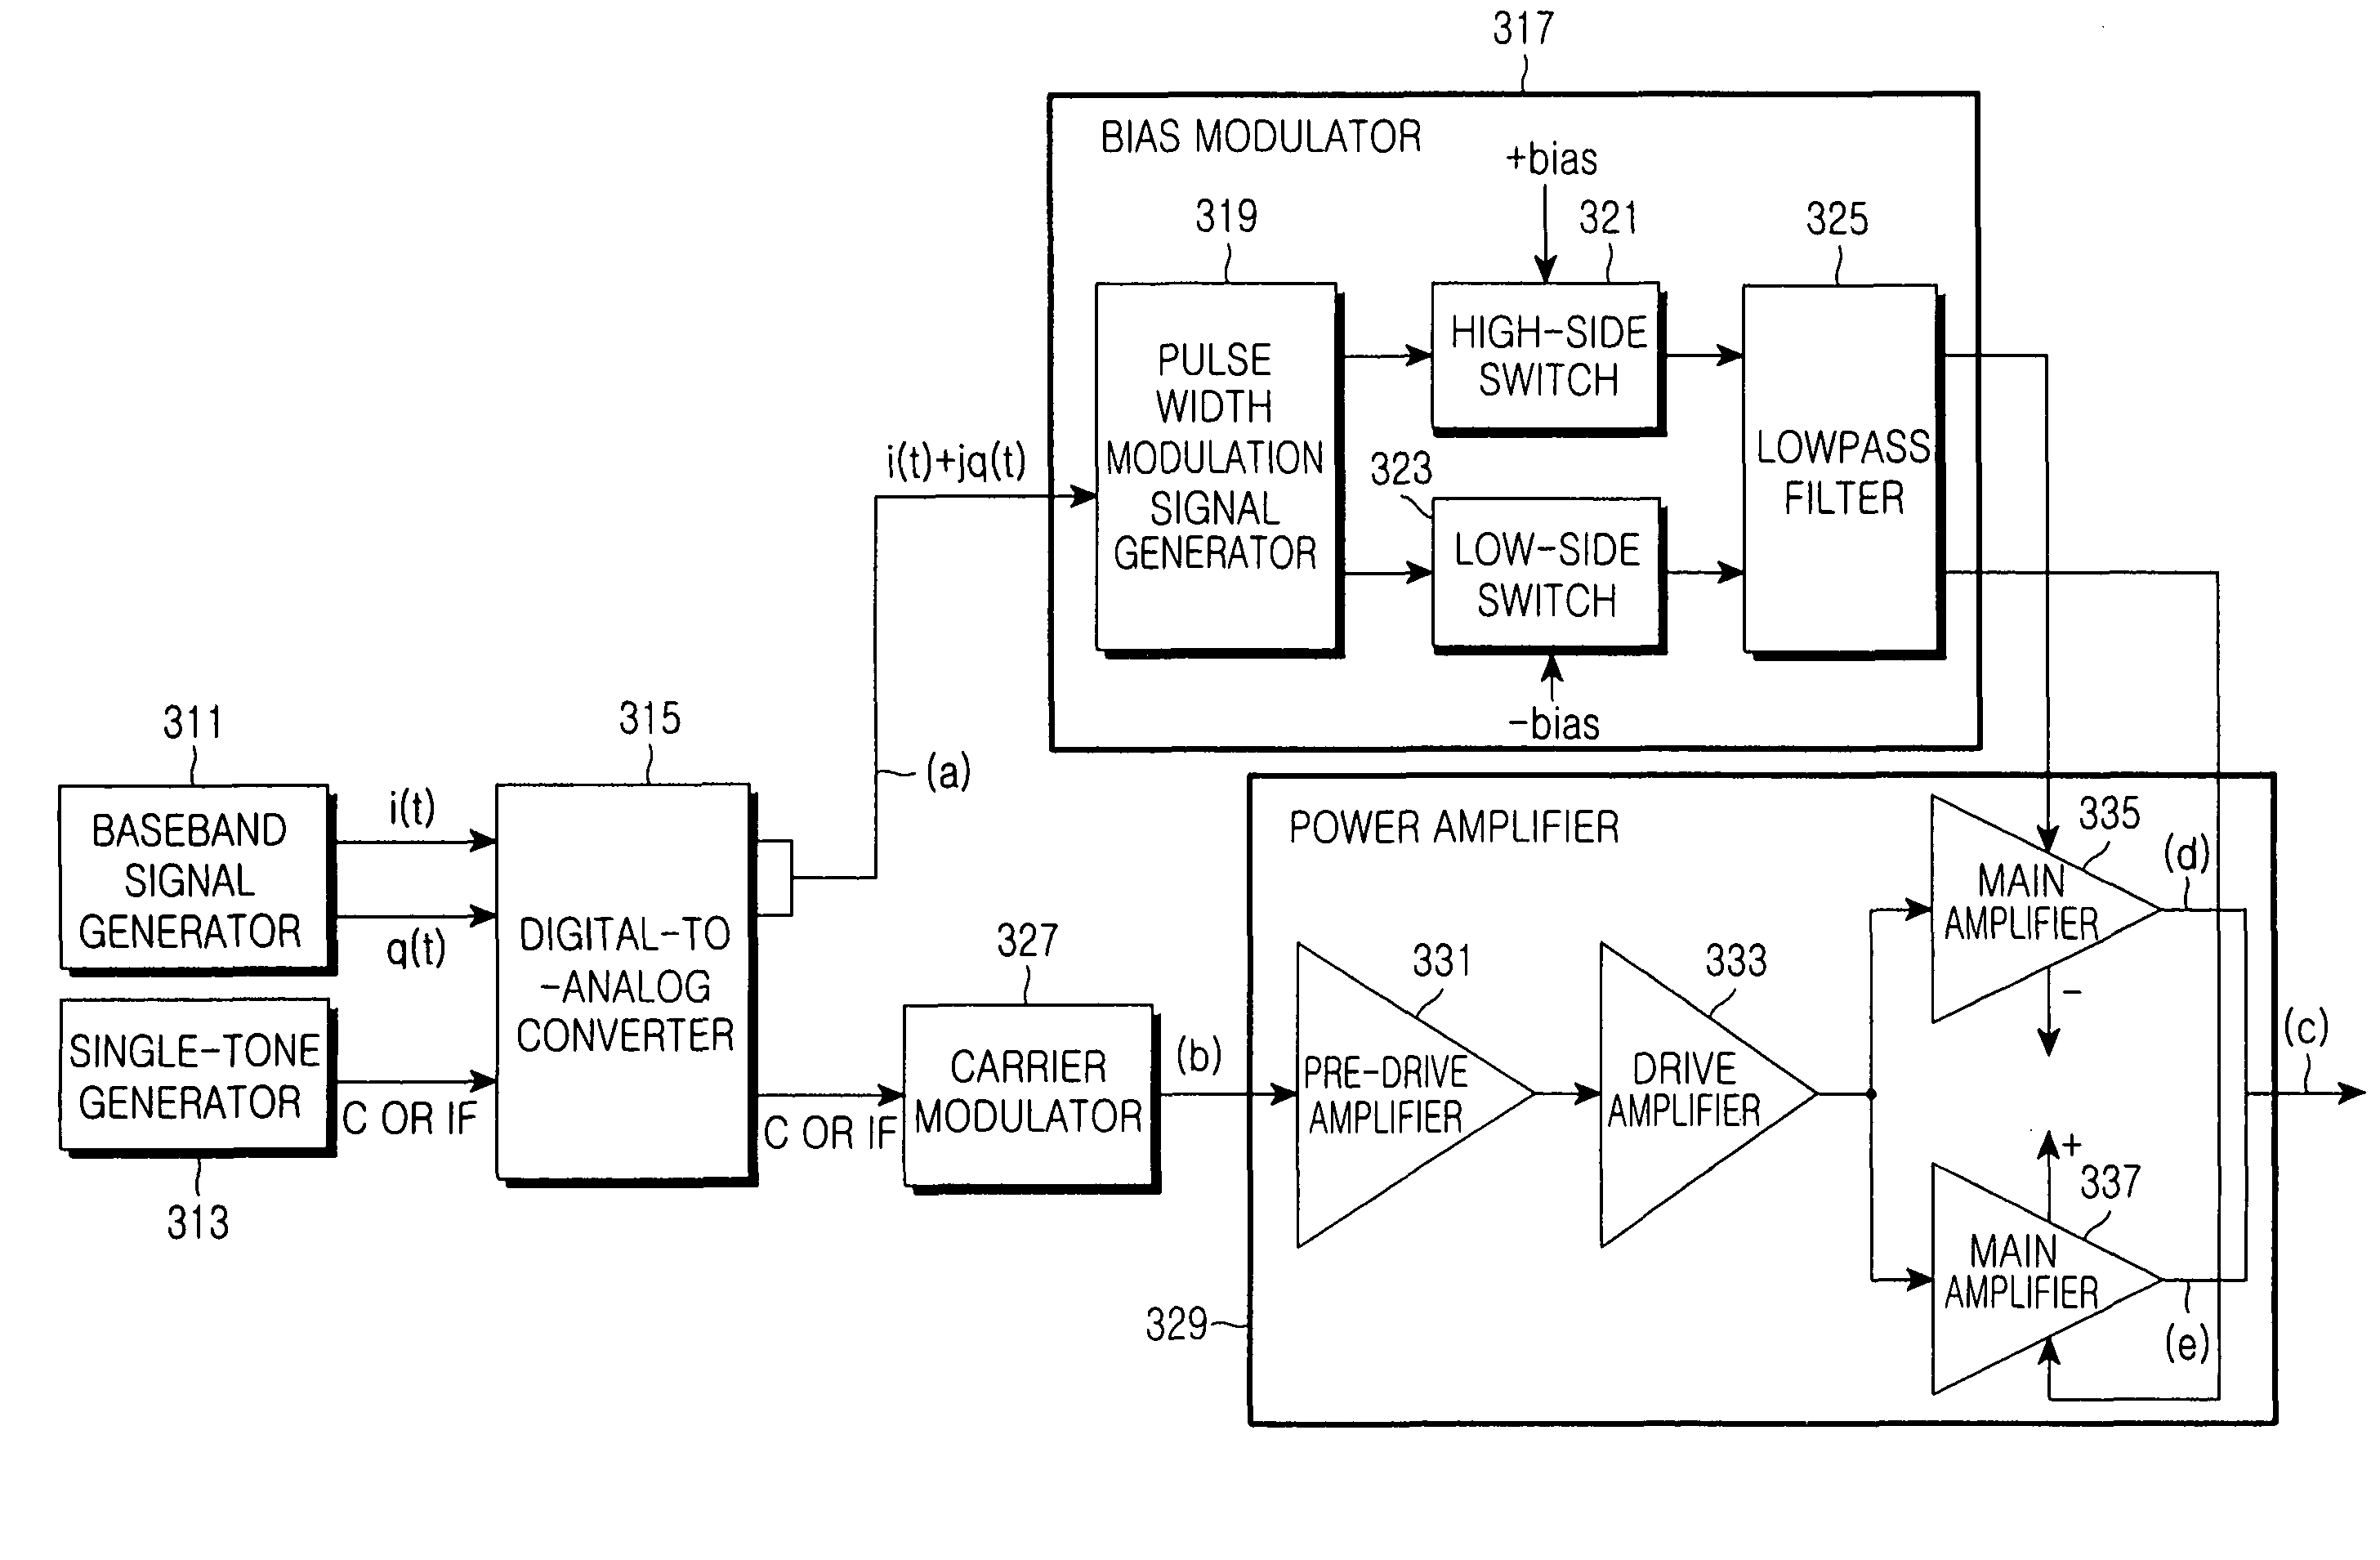 Apparatus and method for amplifying signal power in a communication system